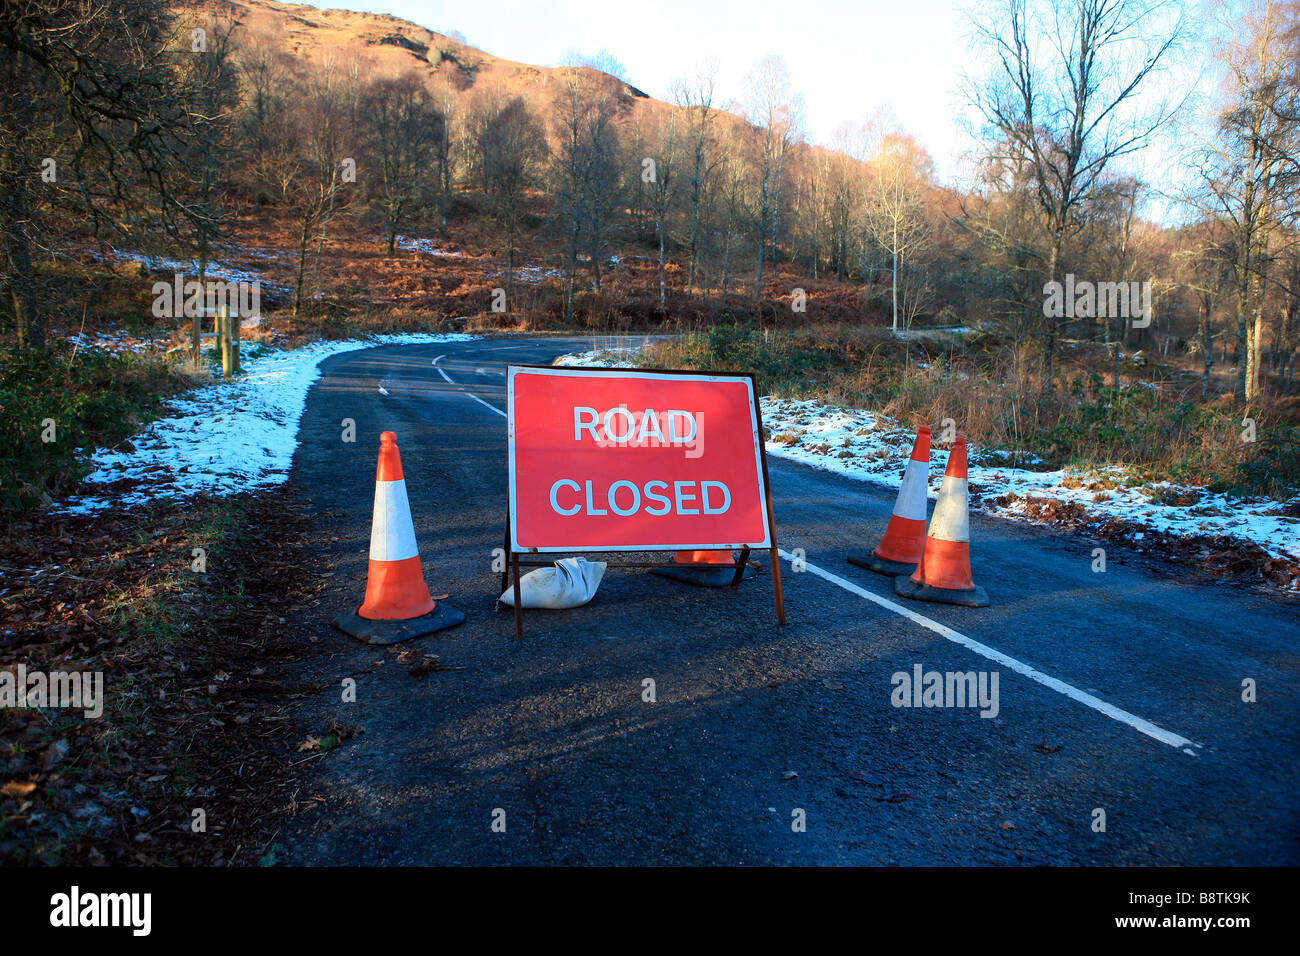 Road closed sign Stock Photo